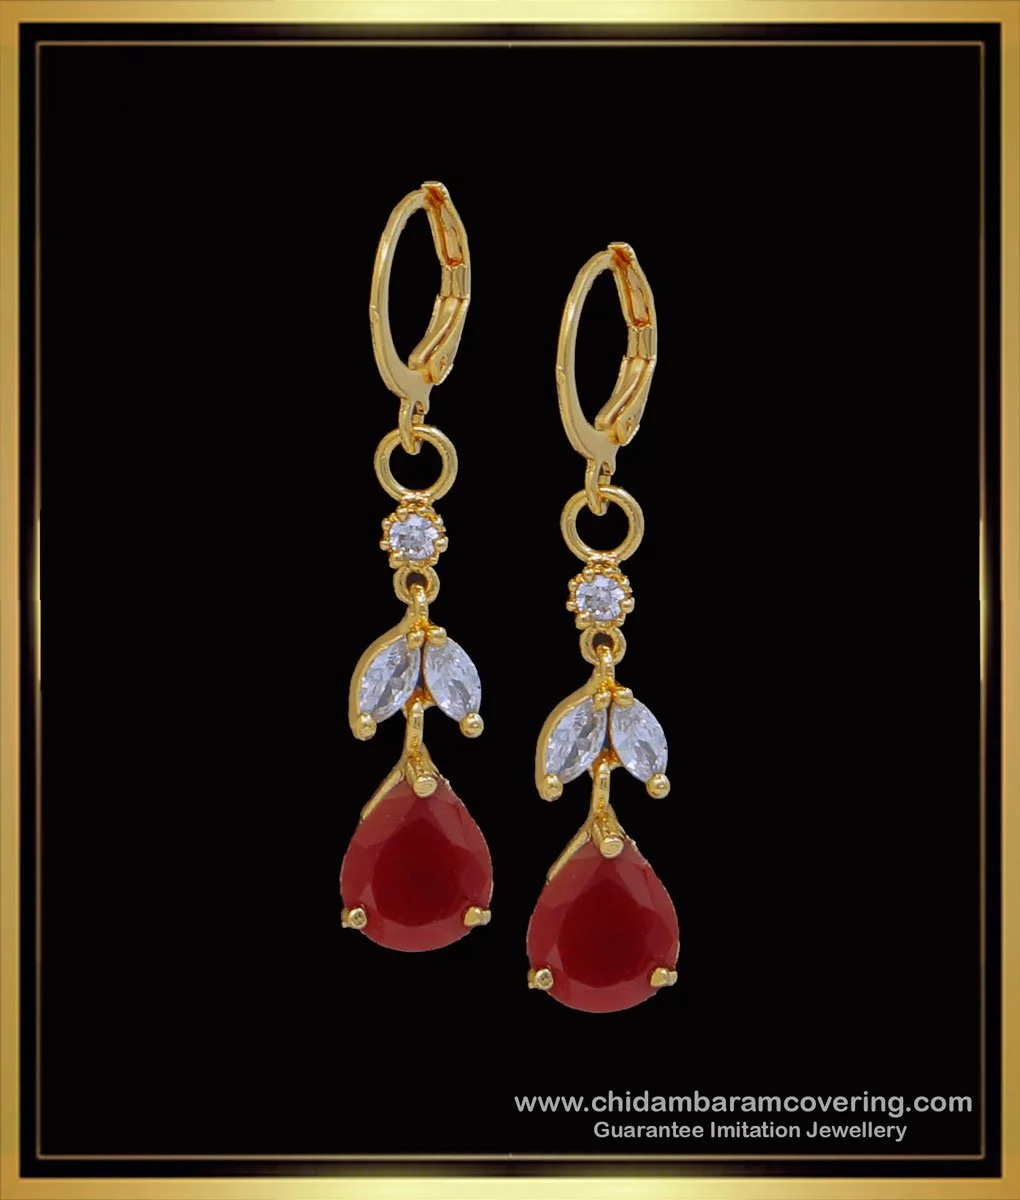 ELEME IMITATION JEWELLERY EARRINGS GOLD PLATED 24 CARAT MICRO GOLD PLATED  EARRINGS WITH SOUTH SCREW BACK PREMIUM QUALITY